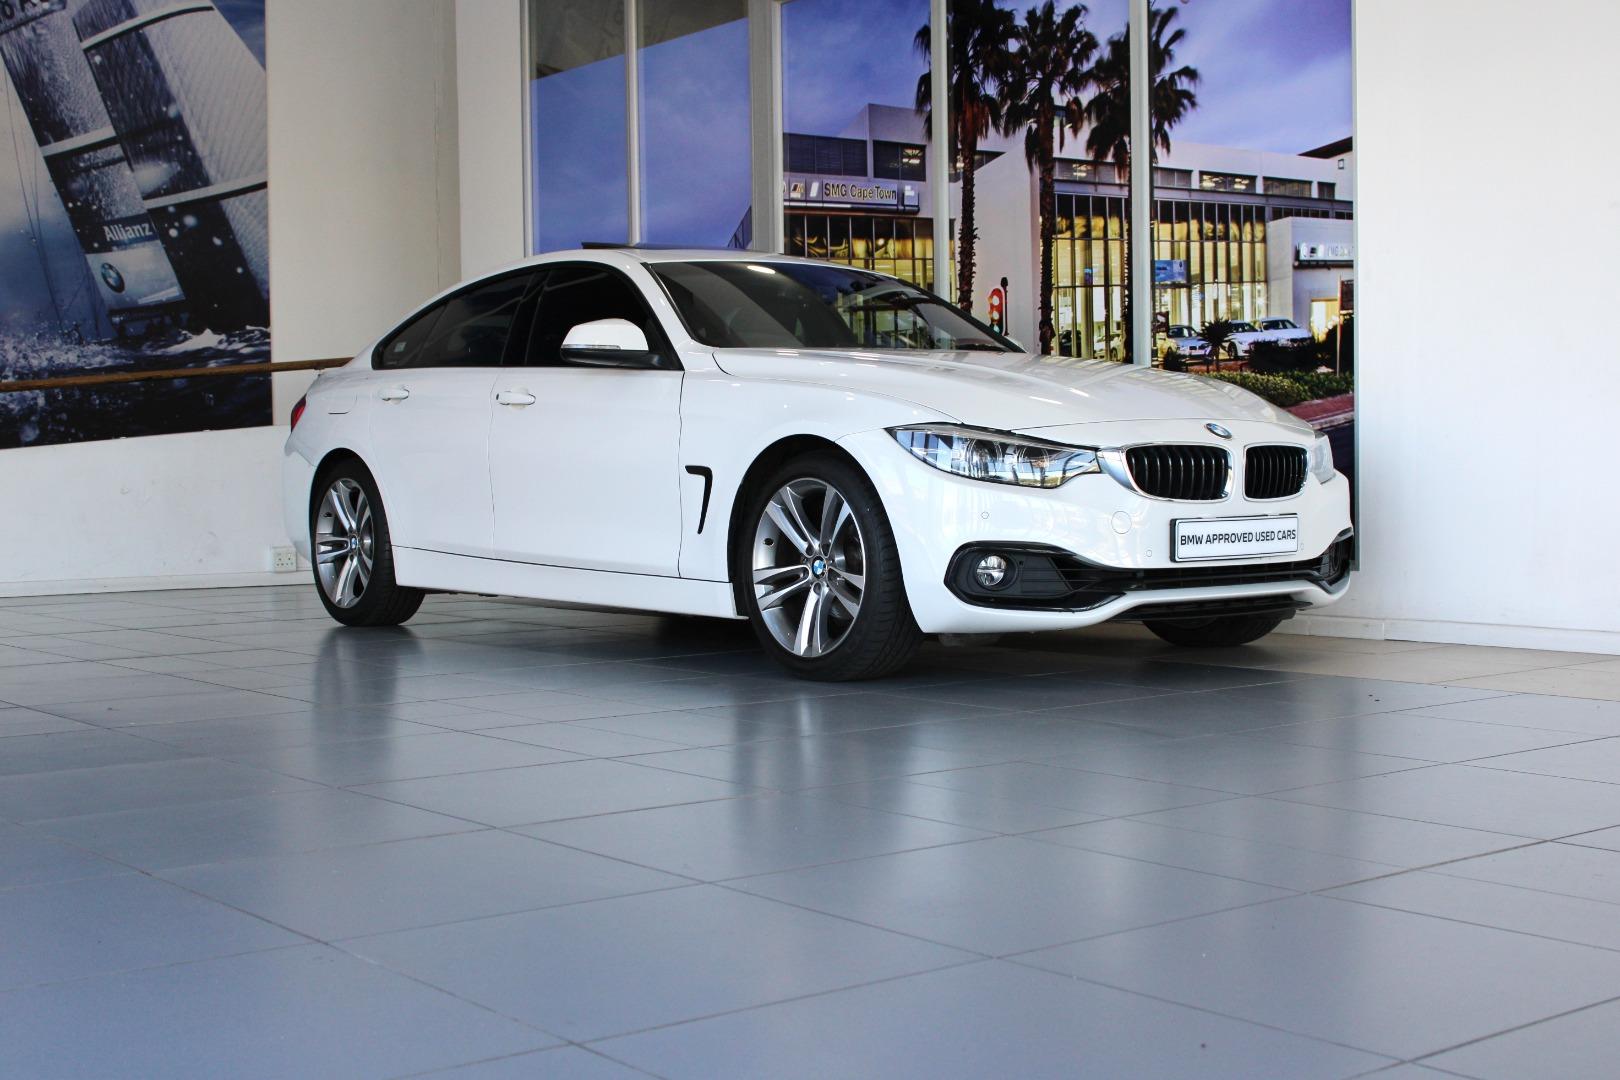 2018 BMW 420i GRAN COUPE SPORT LINE AT (F36)  for sale - SMG12|USED|115321